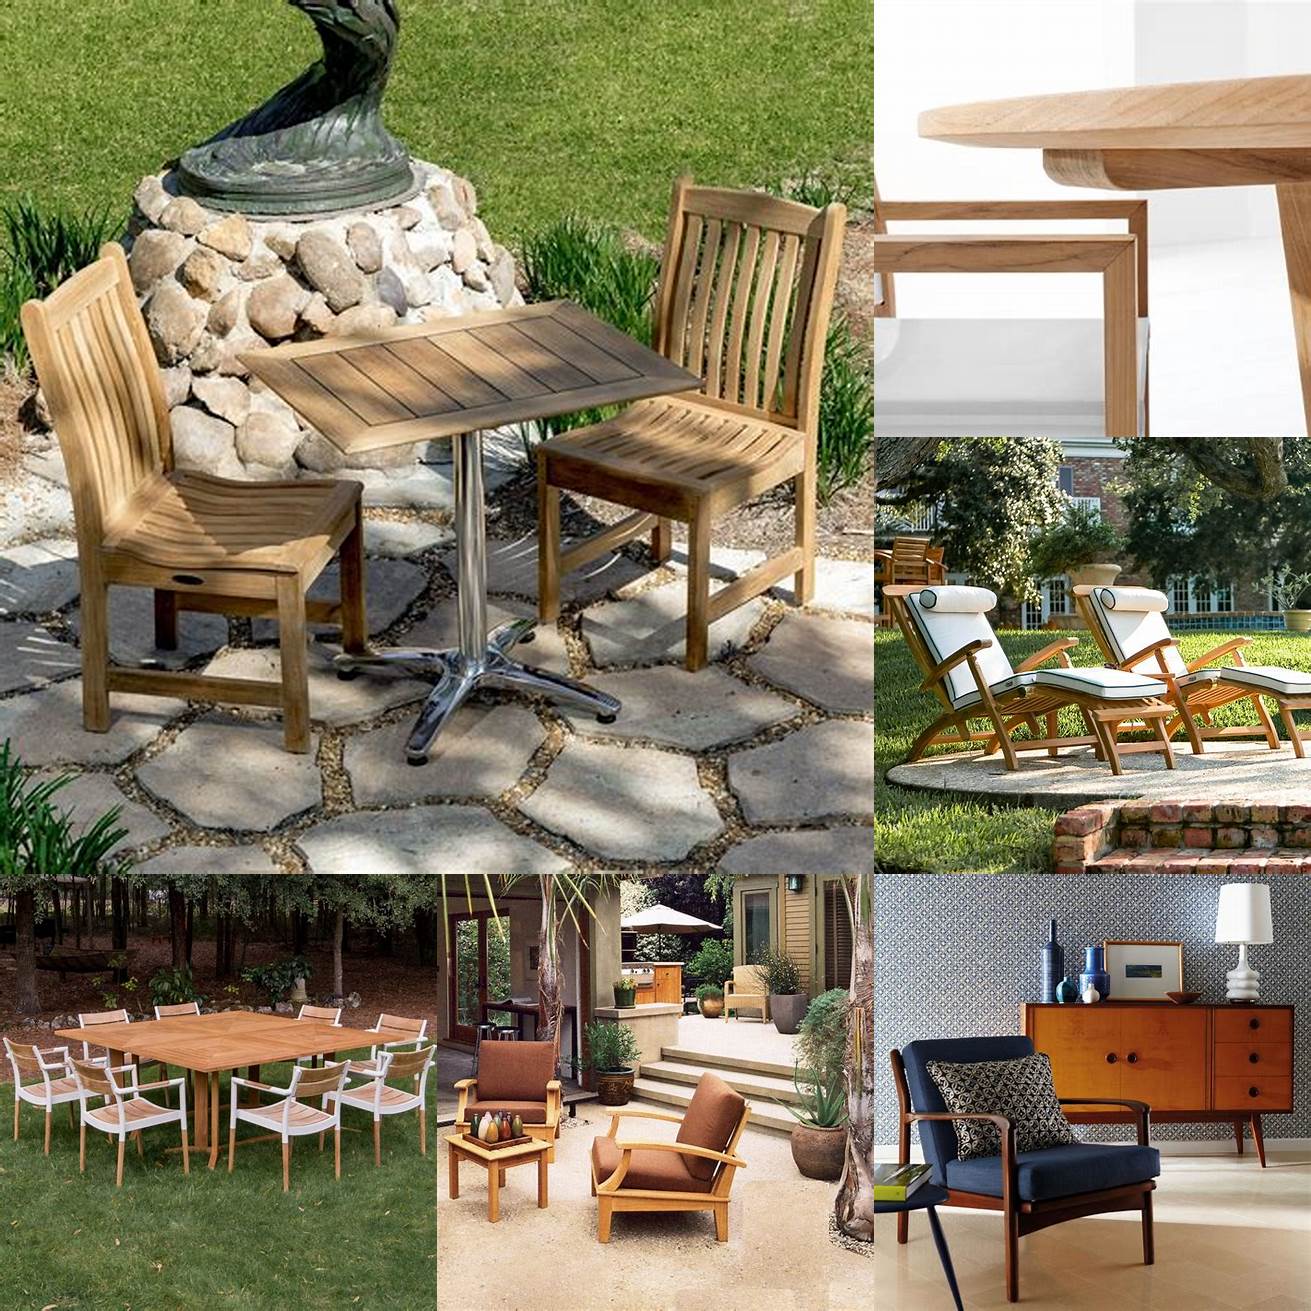 4 Caring for Your Wall Street Journal Teak Furniture